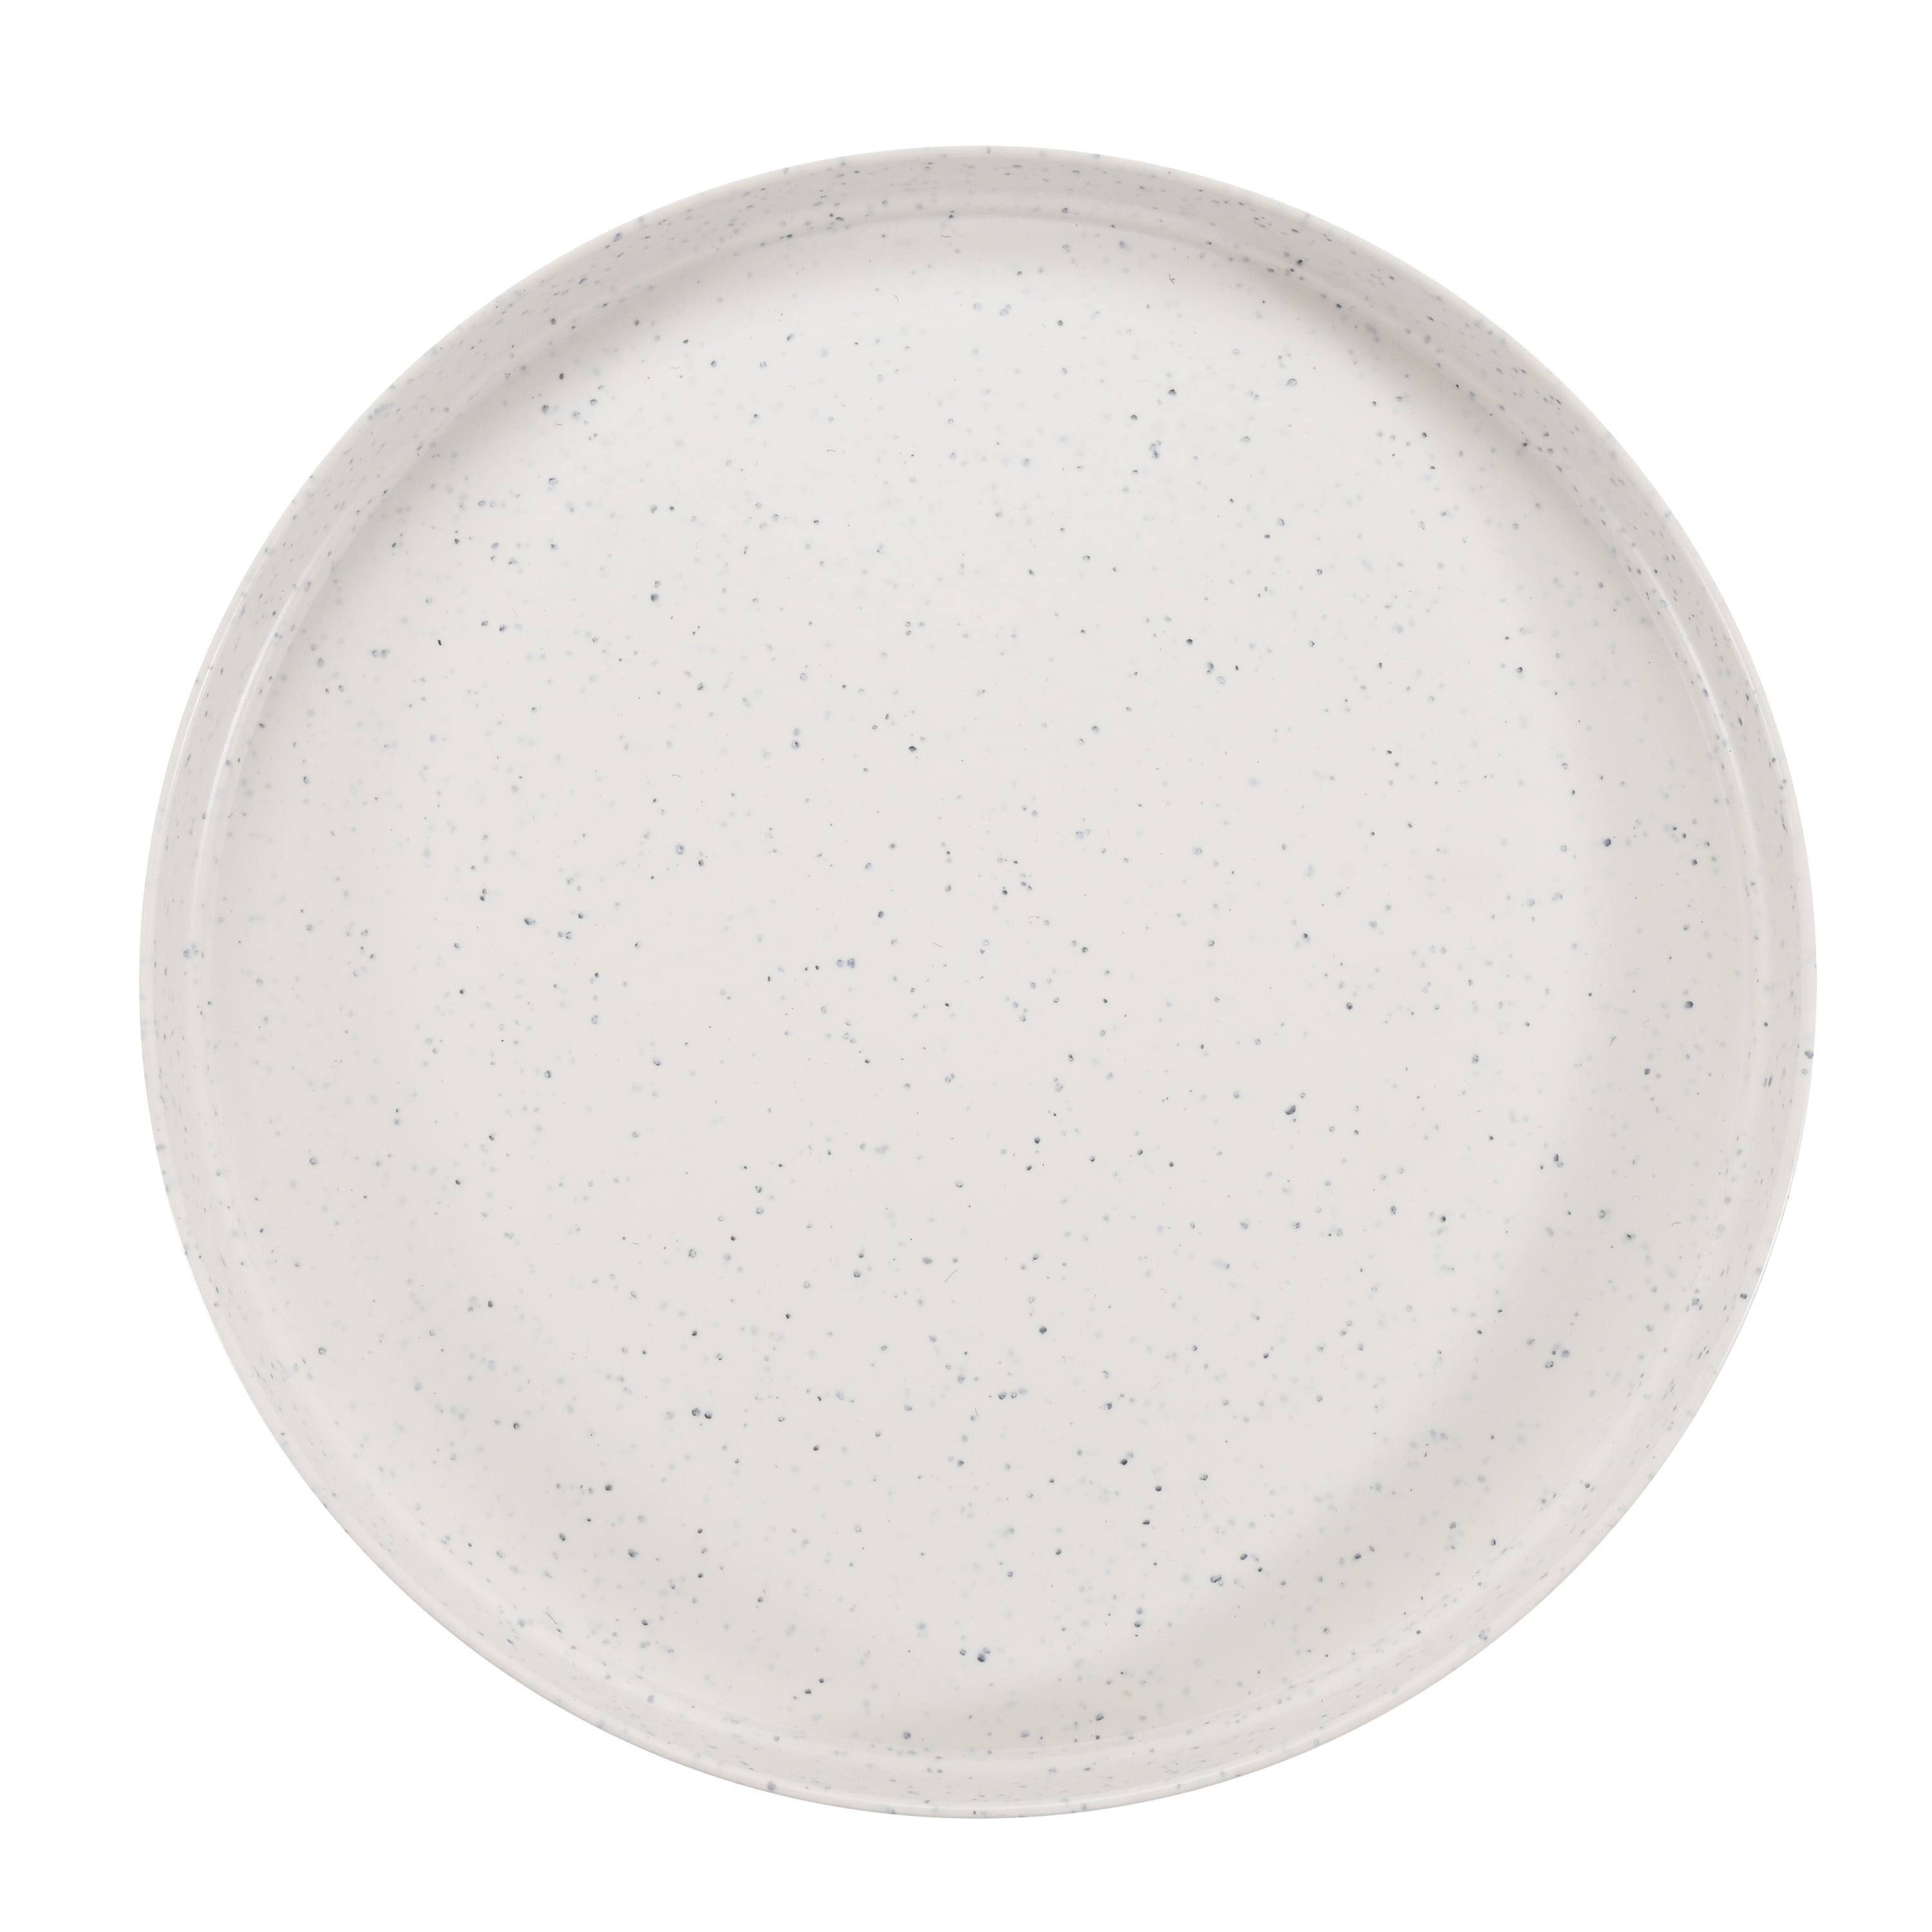 Mainstays 10-Inch Eco-Friendly Recycled Plastic Dinner Plate, Vanilla Dream